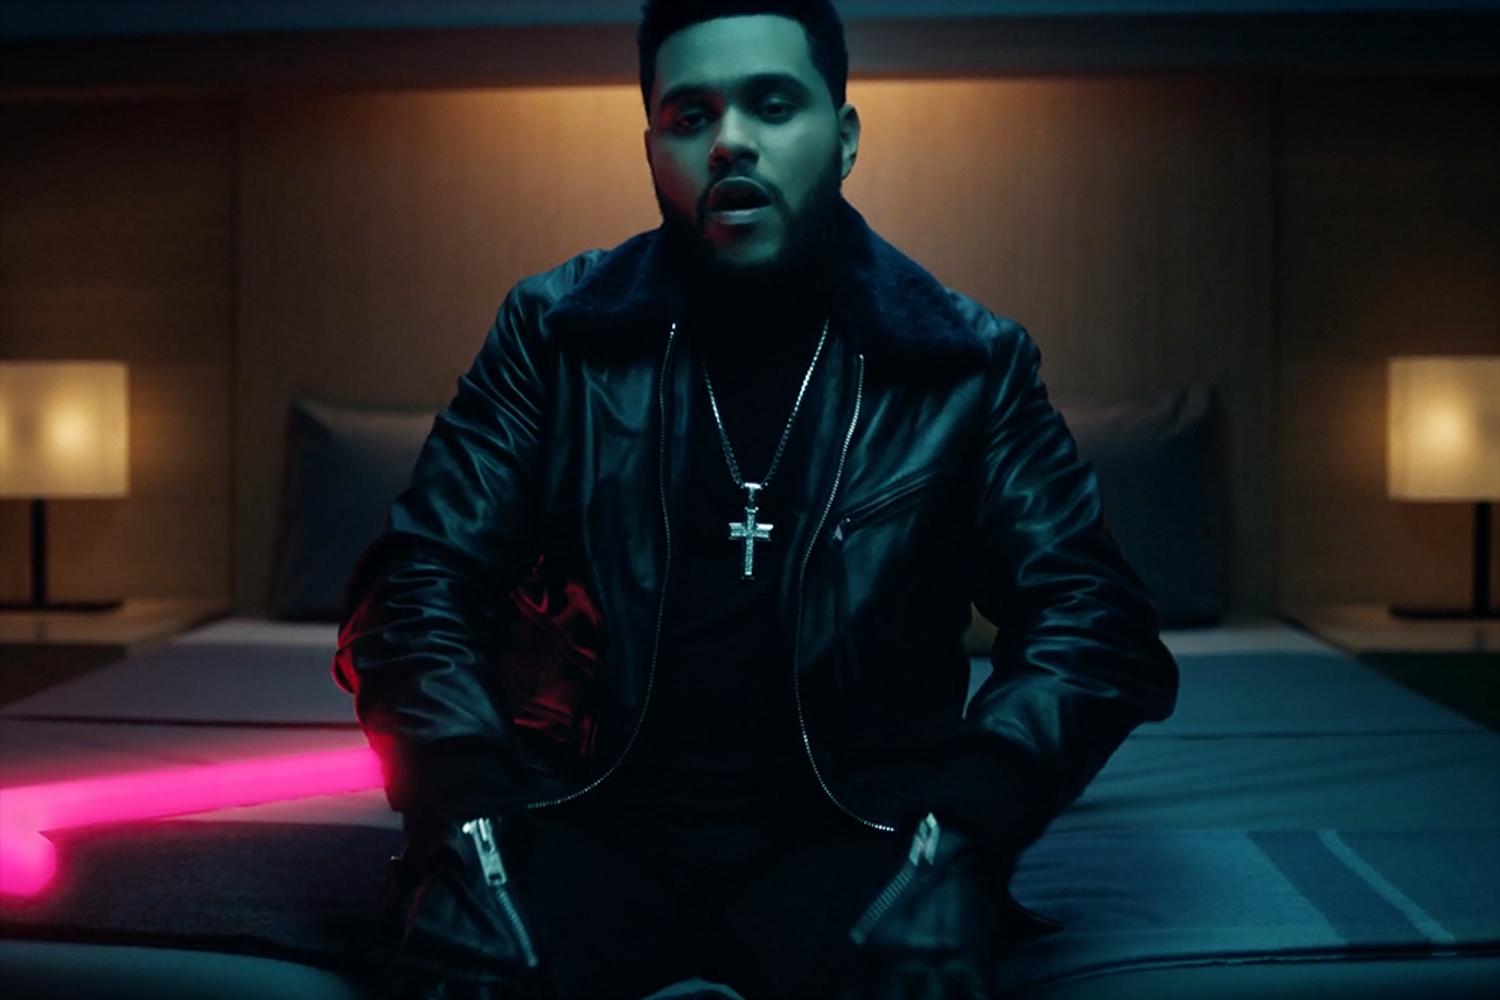 RIP - The Weeknd cuts his signature barnet in video for Daft Punk collaboration ‘Starboy’